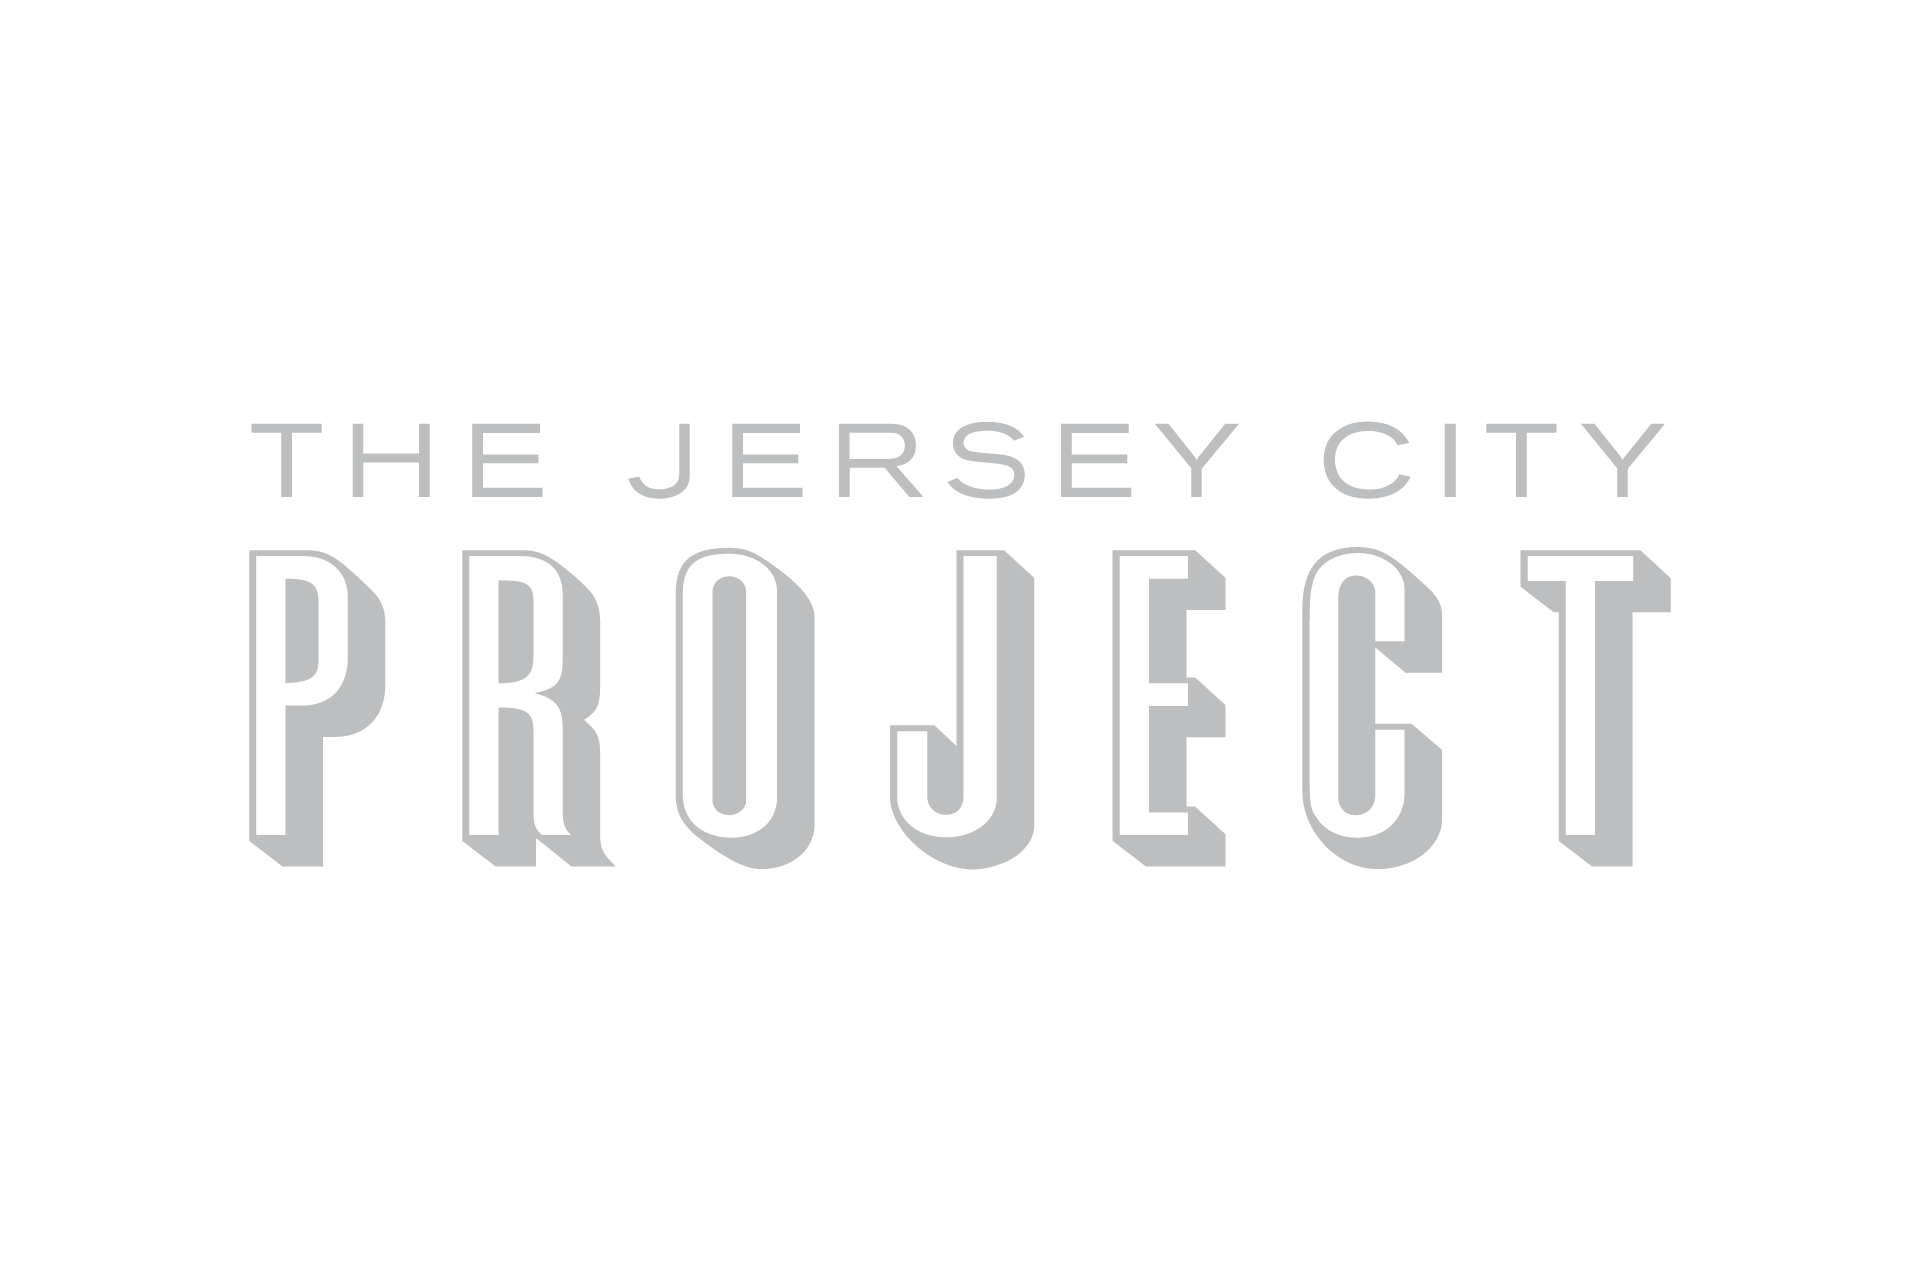 The Jersey City Project